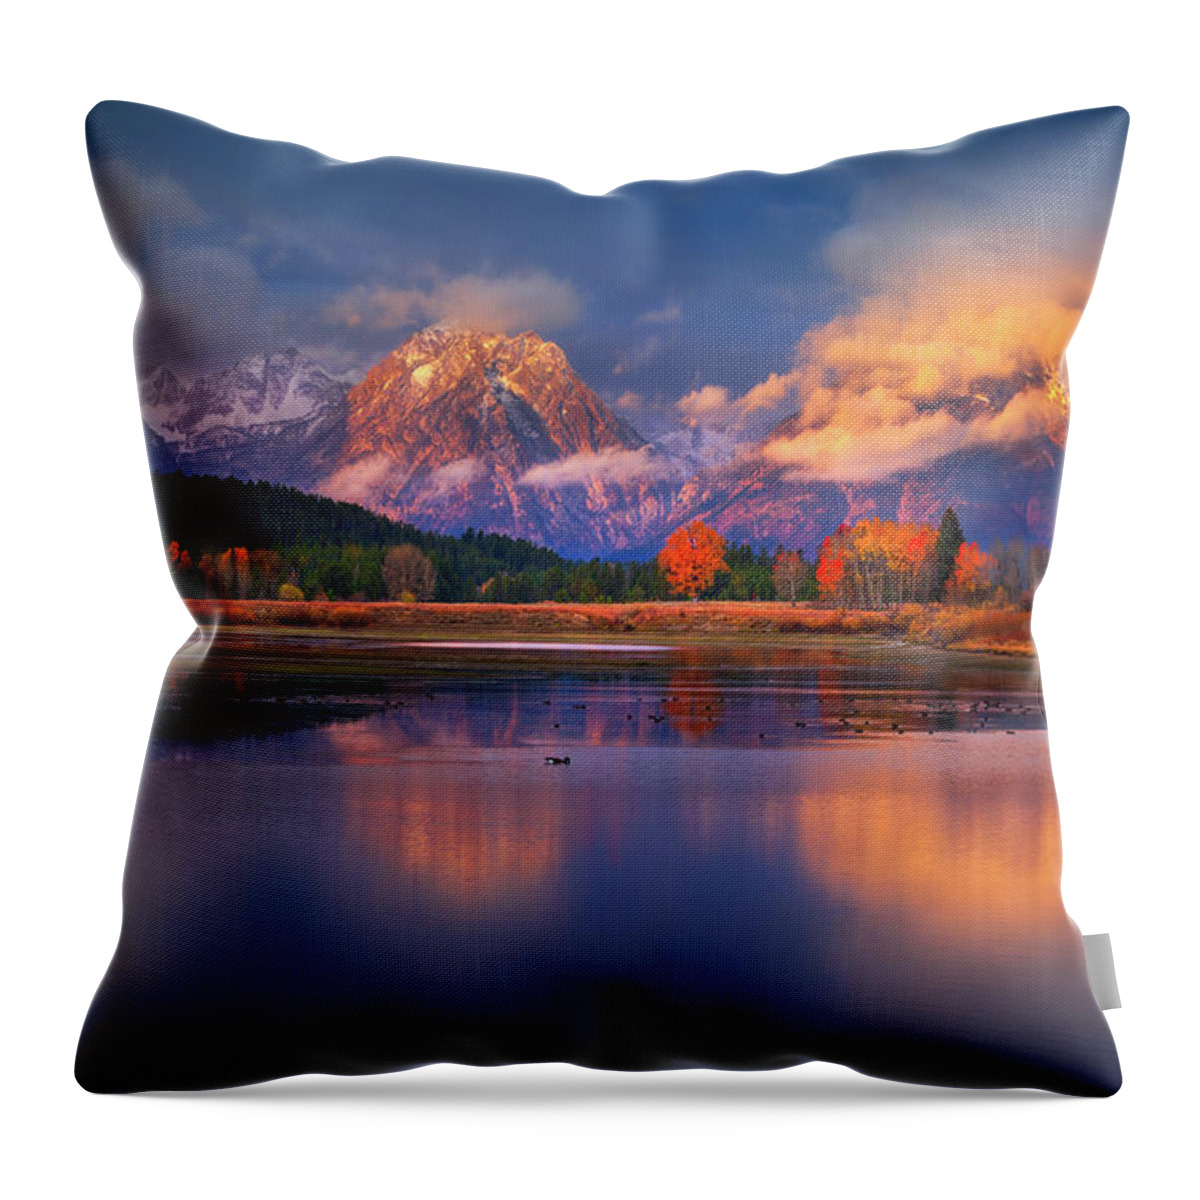 October Throw Pillow featuring the photograph Sunrise At Oxbow Bend by Chris Steele